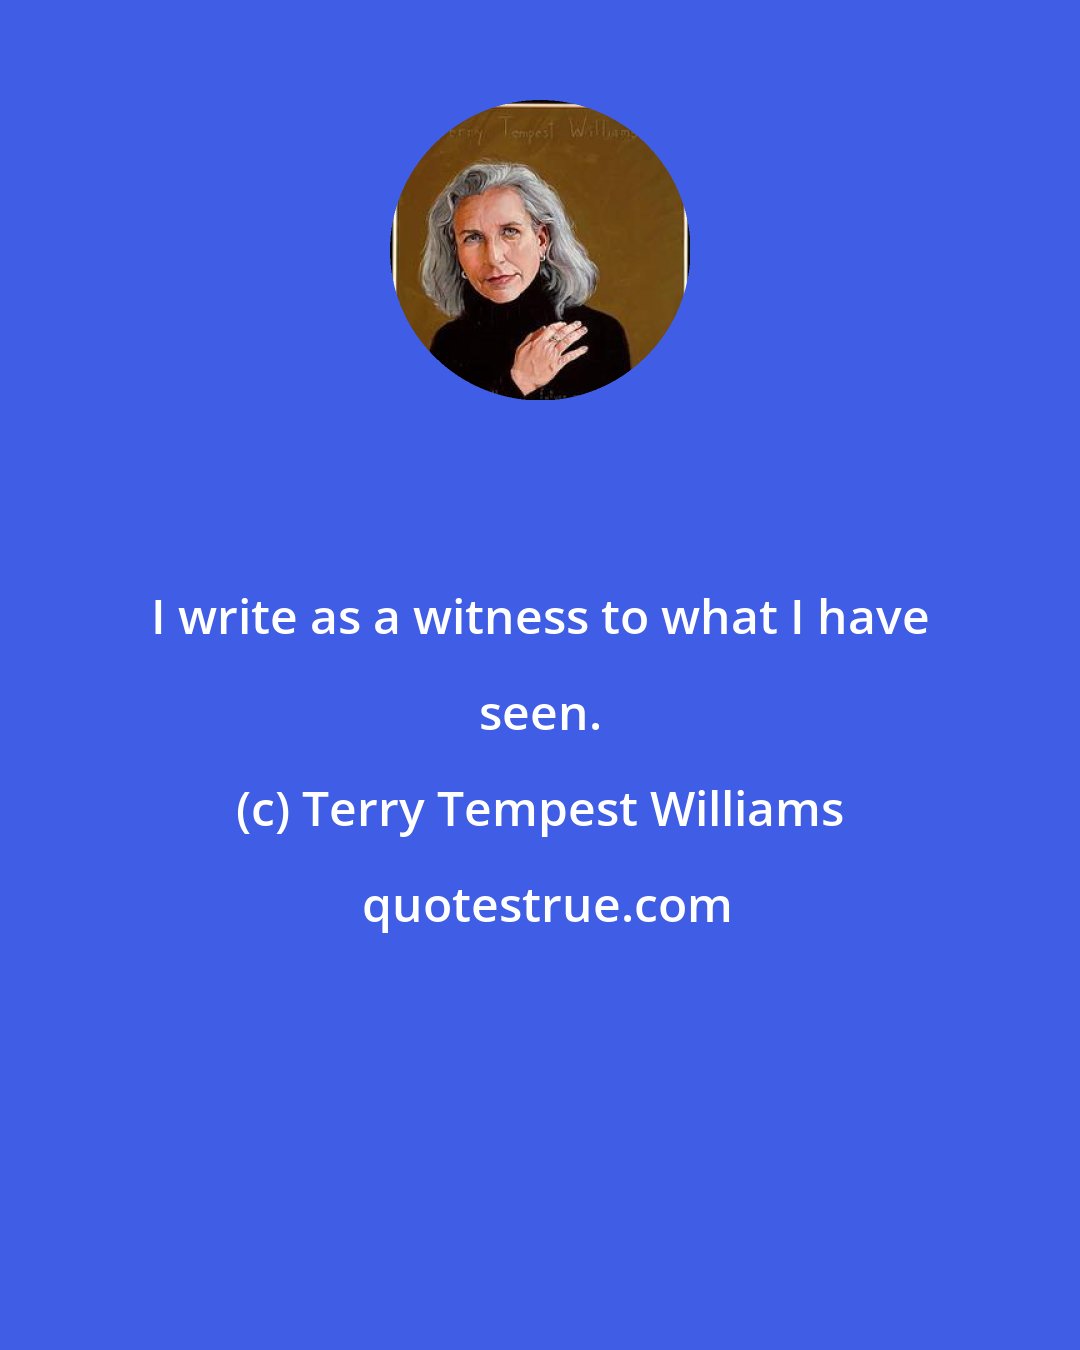 Terry Tempest Williams: I write as a witness to what I have seen.